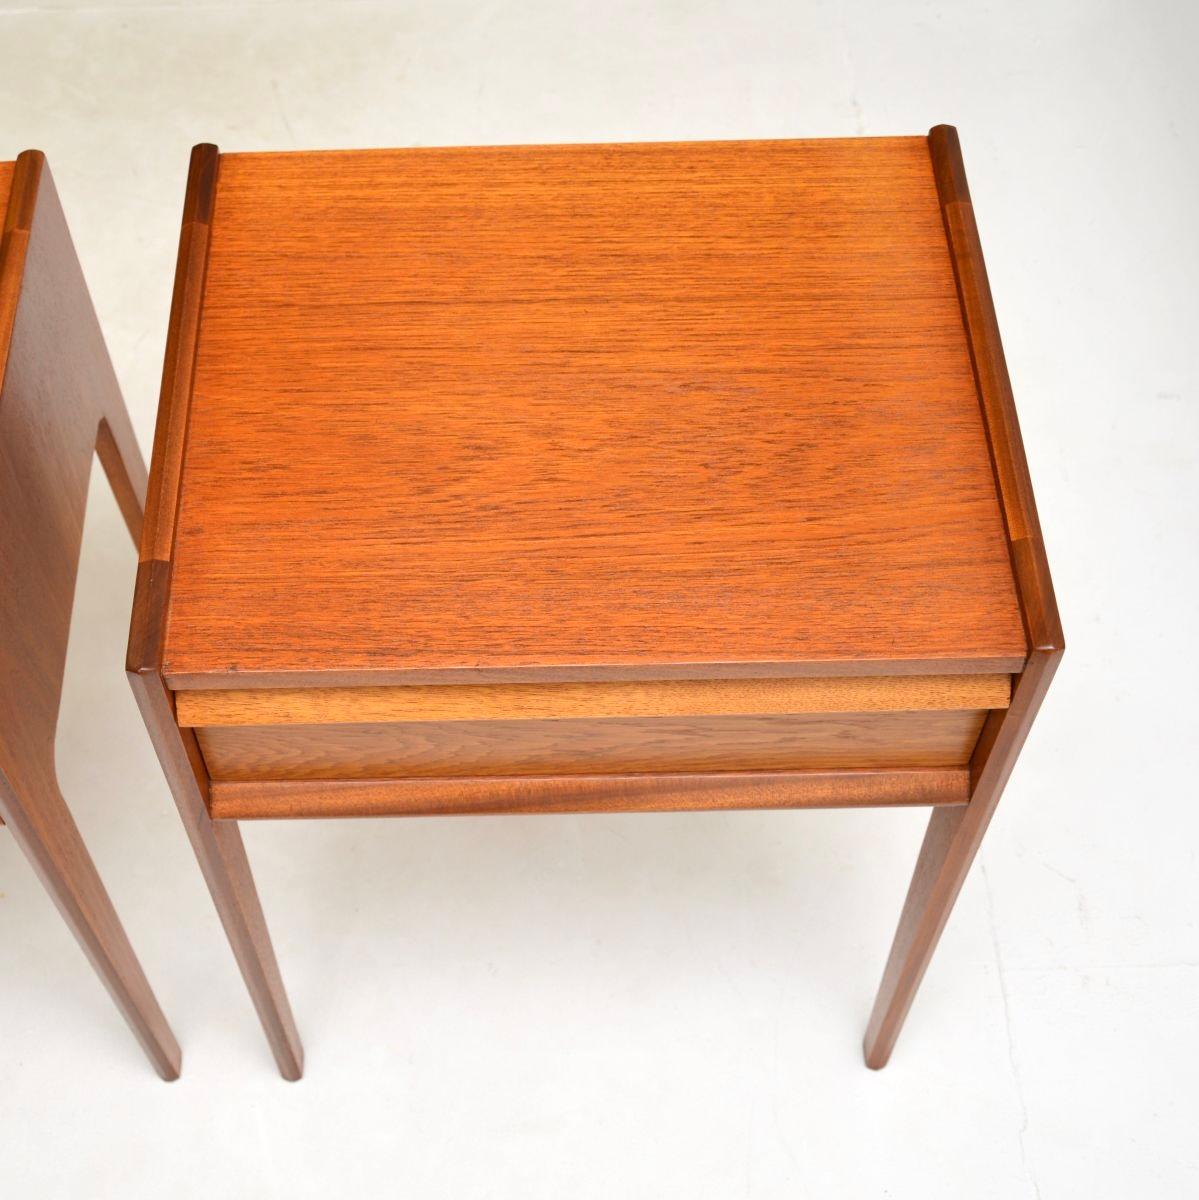 Pair of Vintage Teak Bedside Tables by Younger For Sale 1